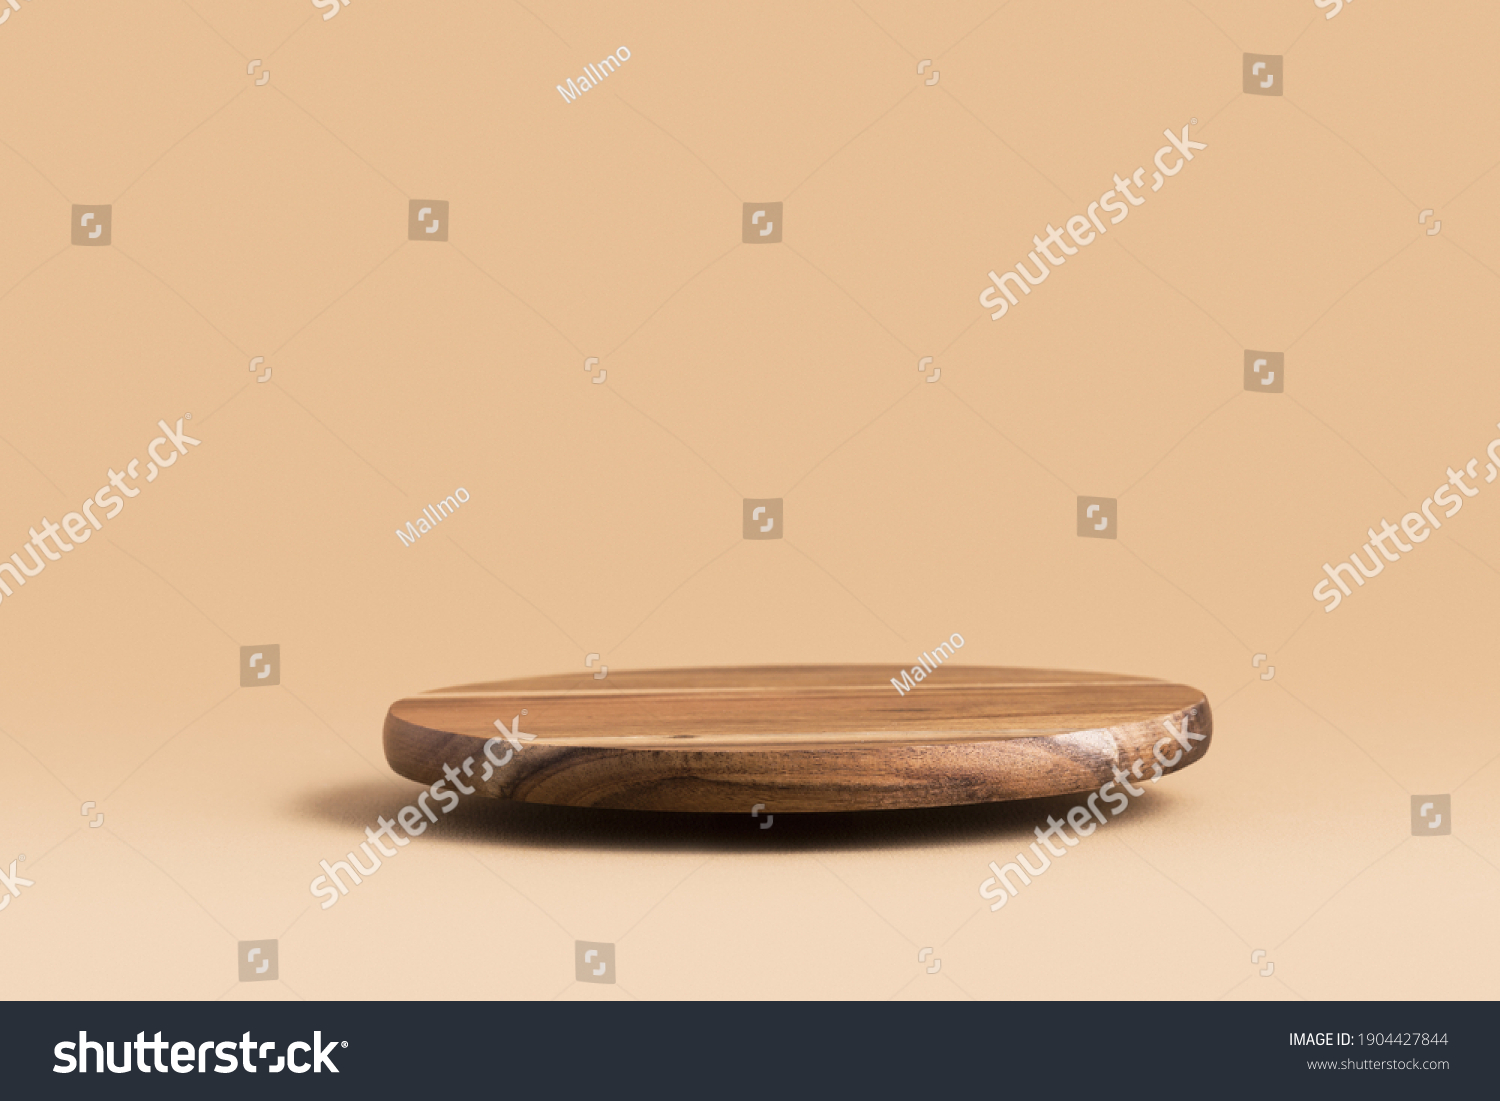 Round wooden podium for food, products or cosmetics against bright brown background. #1904427844